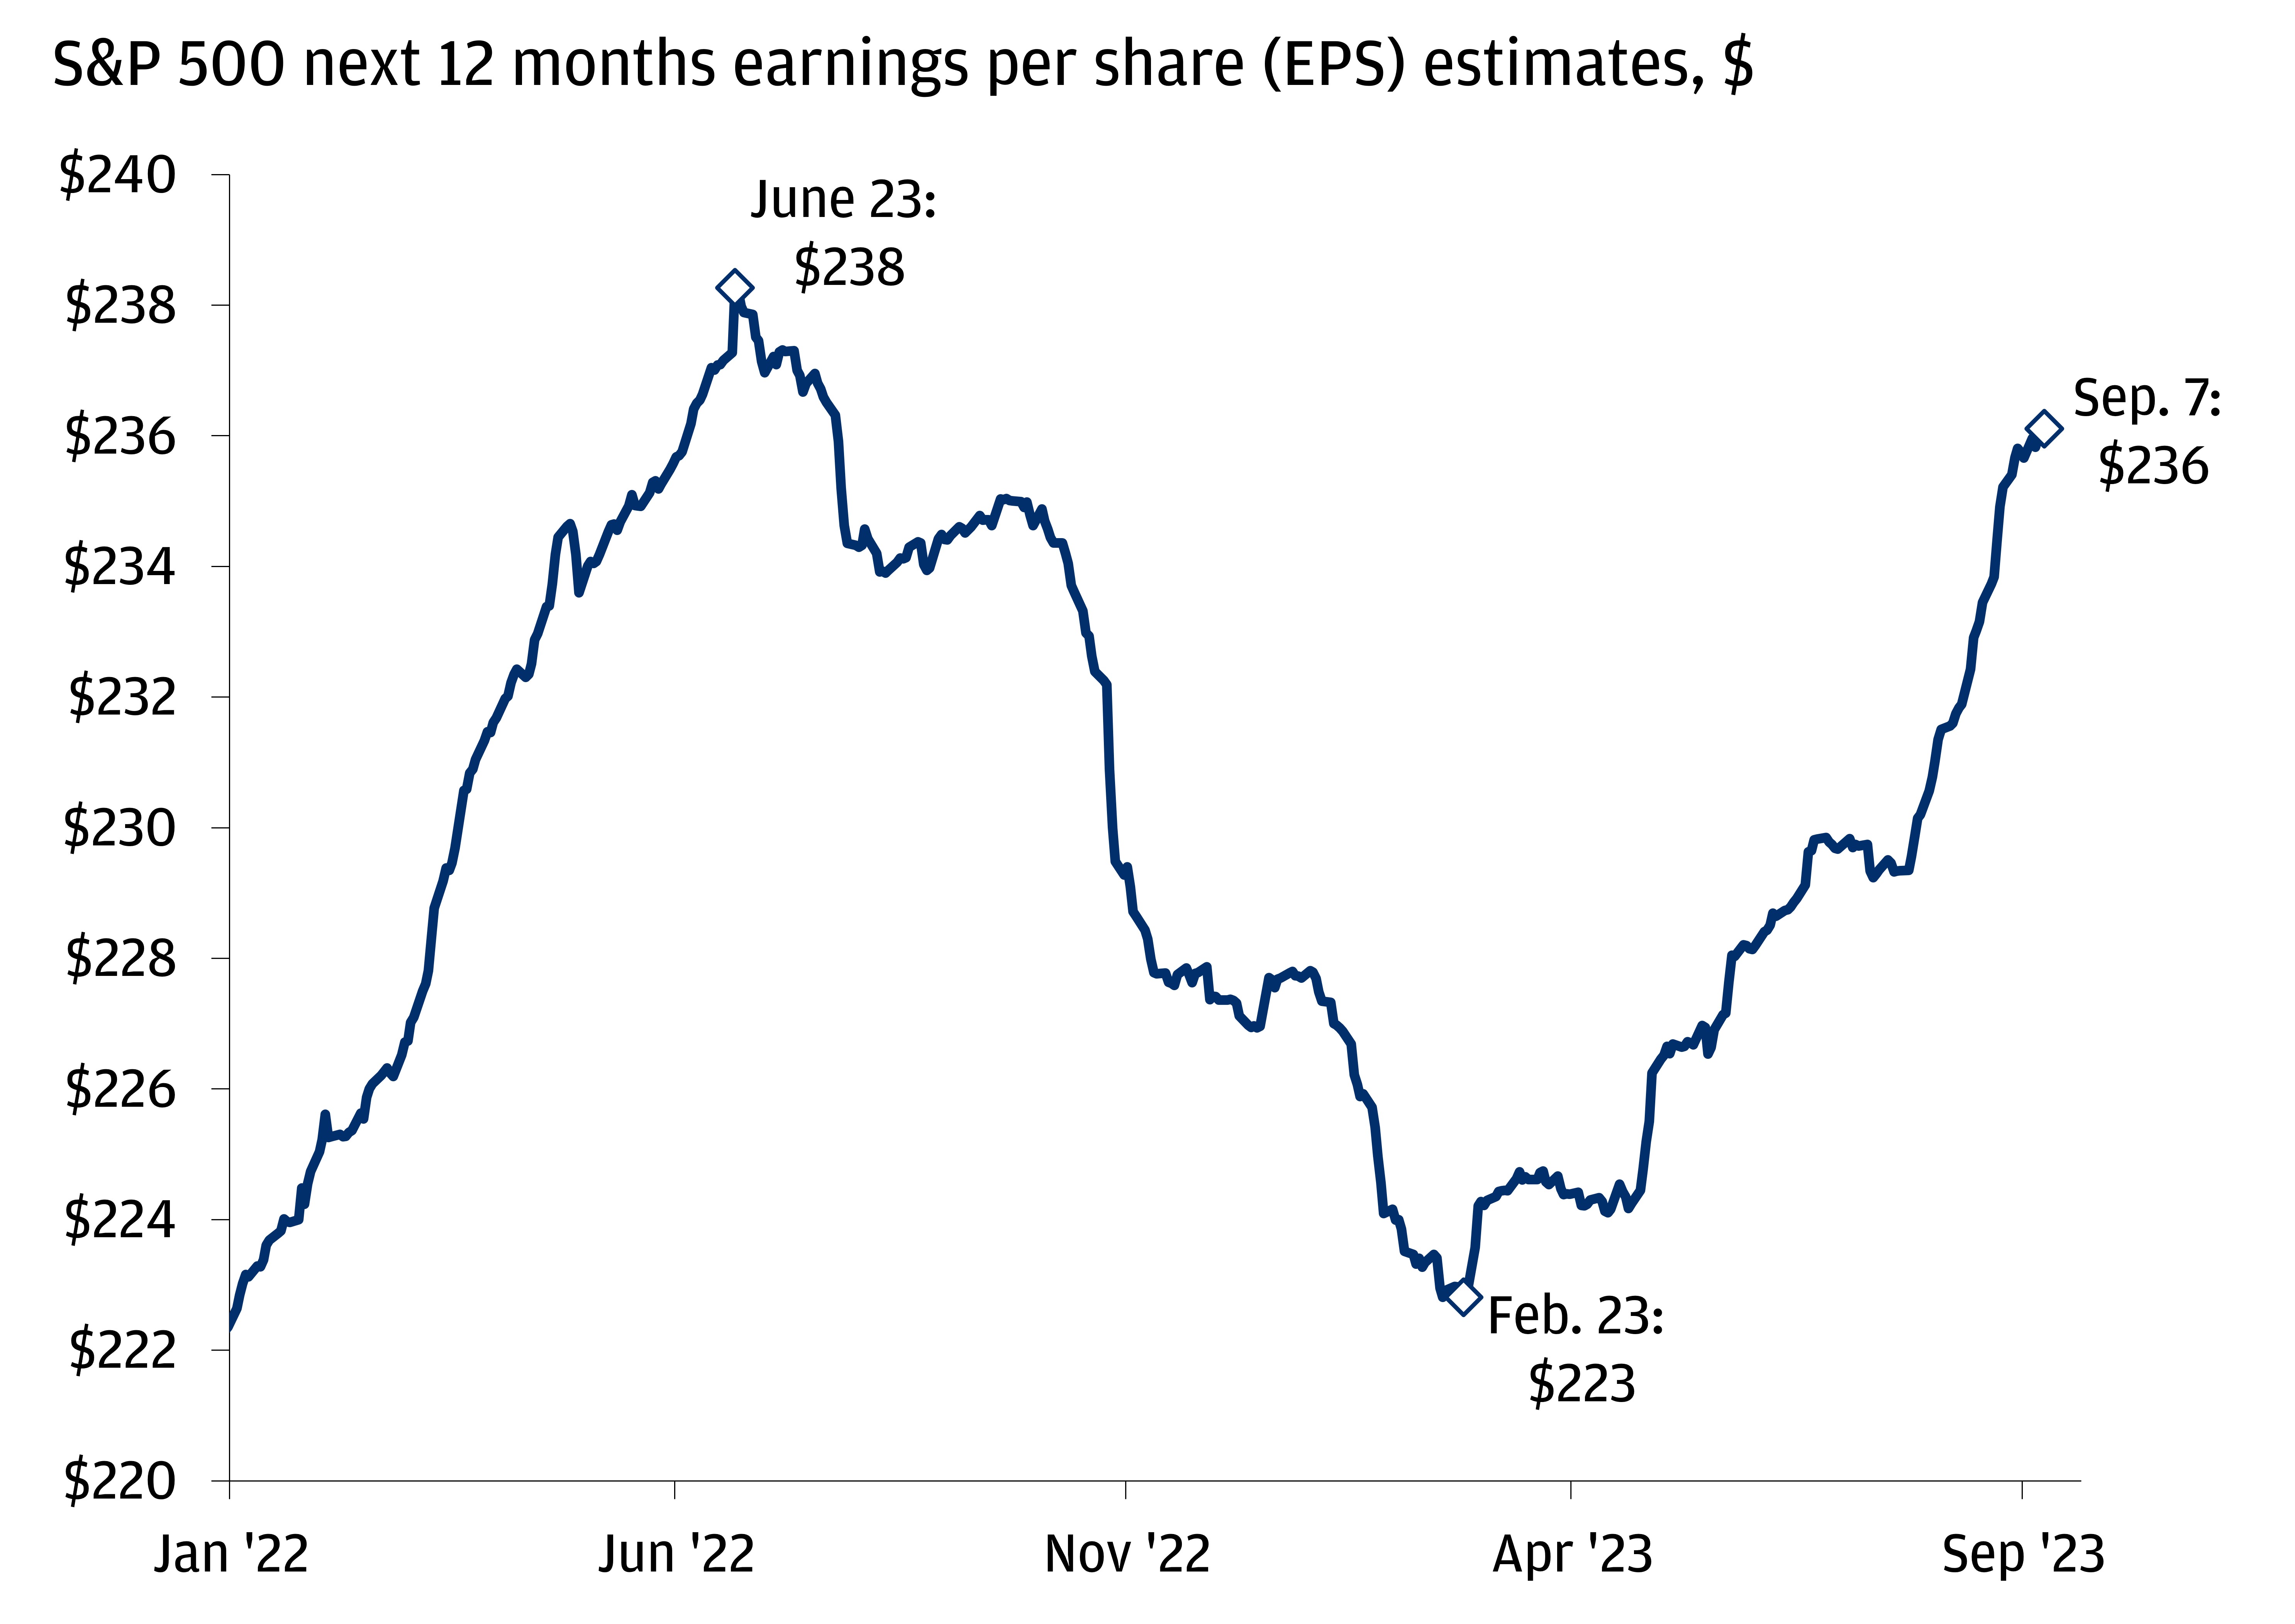 The chart describes the S&P 500 next 12 months earnings per share (EPS) estimates in $.